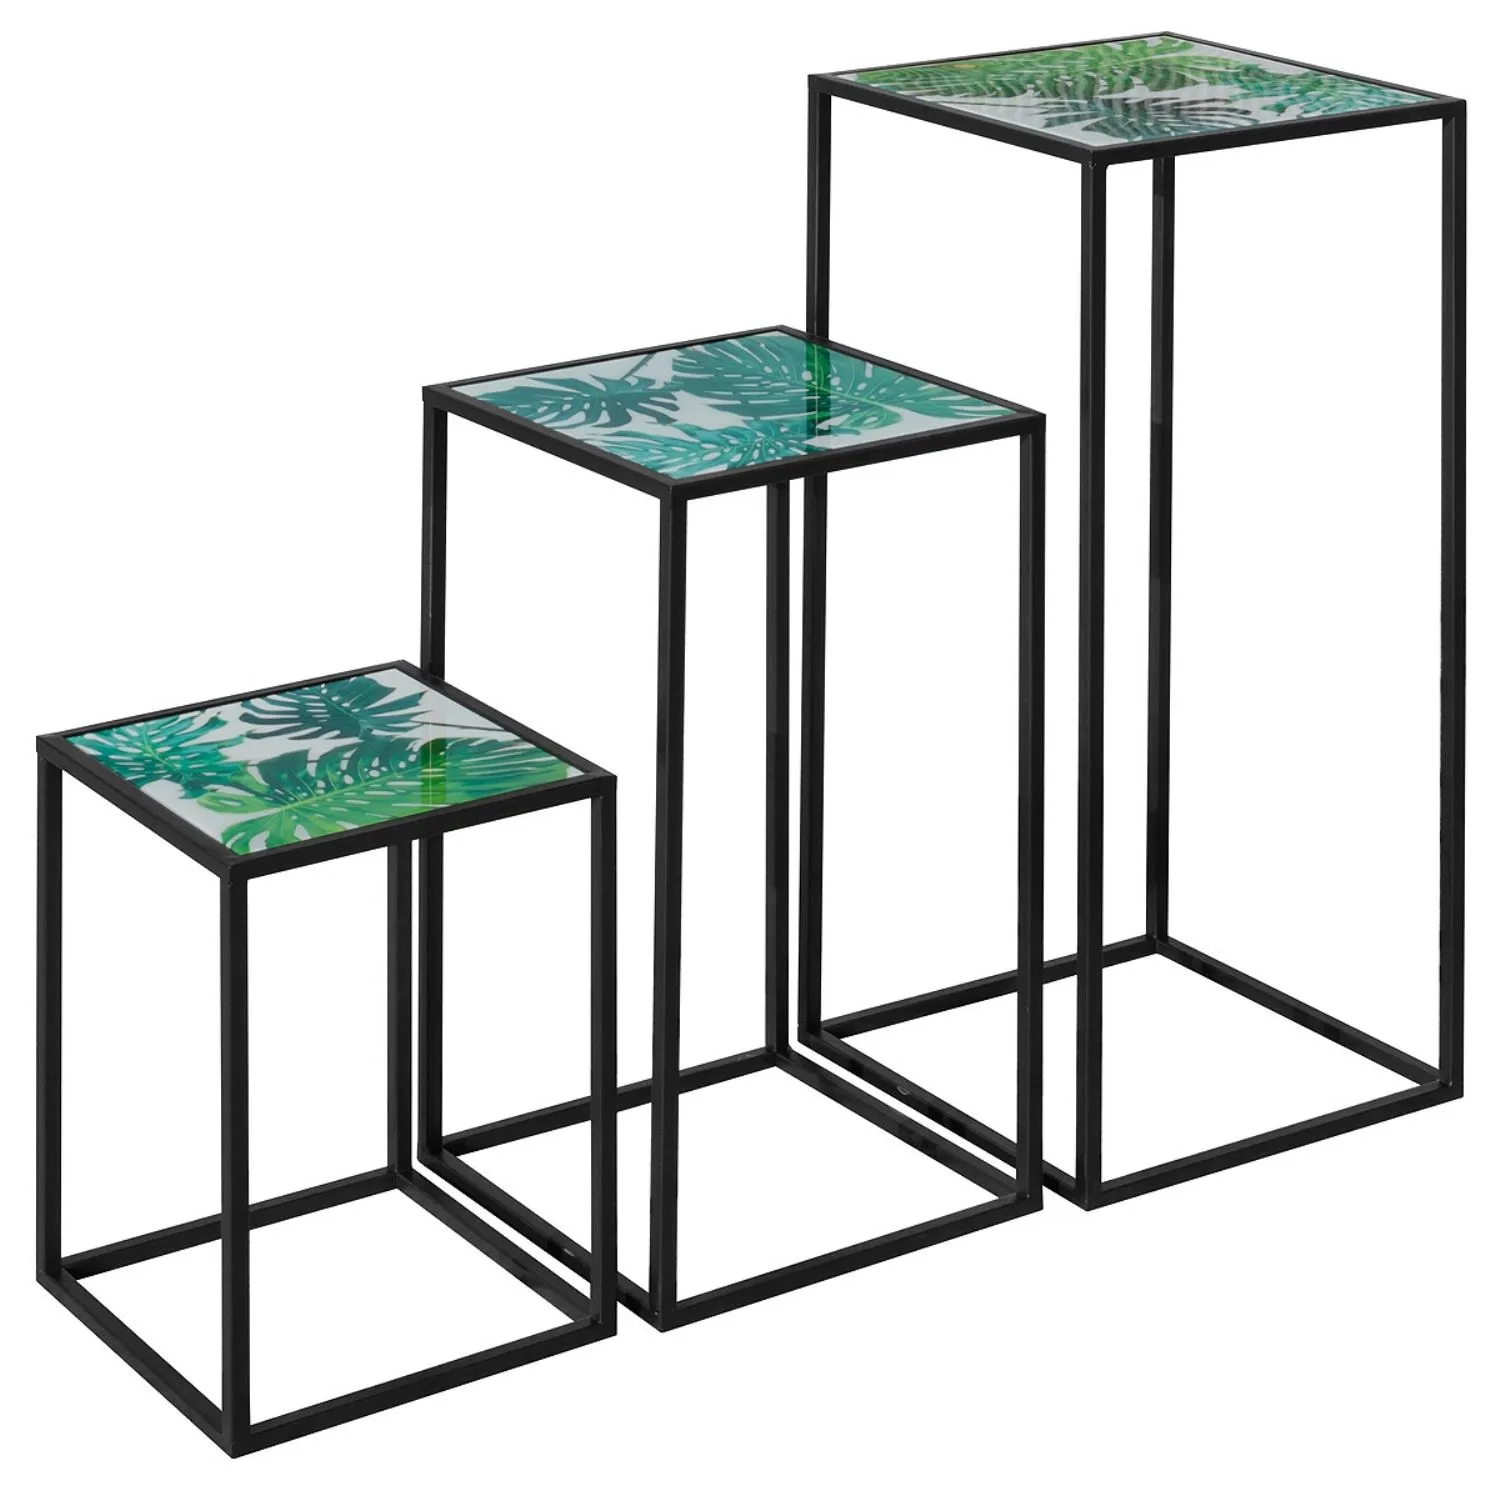 Nest of Three Tall Tables (Set of 3) – Green Leaf Top